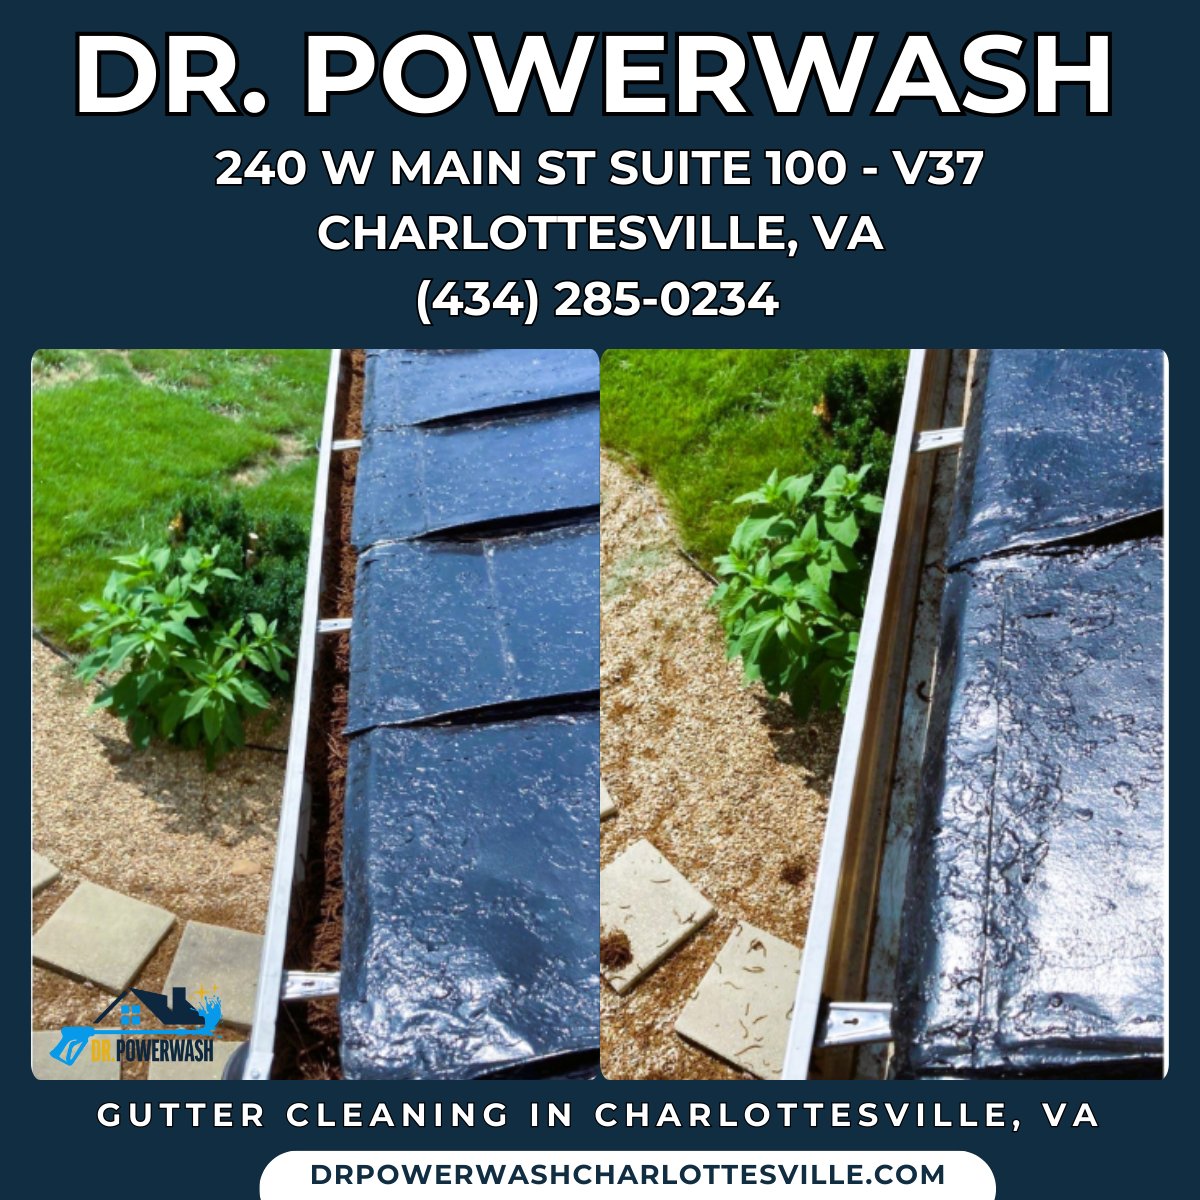 Gutter Cleaning in Charlottesville, VA - Dr. Powerwash

drpowerwashcharlottesville.com/gutter-cleaning

Dr. Powerwash
240 W Main St Suite 100 - V37
Charlottesville, VA 22902
(434) 285-0234

google.com/maps/place/Dr.…

#GutterCleaning #GutterCleaningCharlottesvilleVA